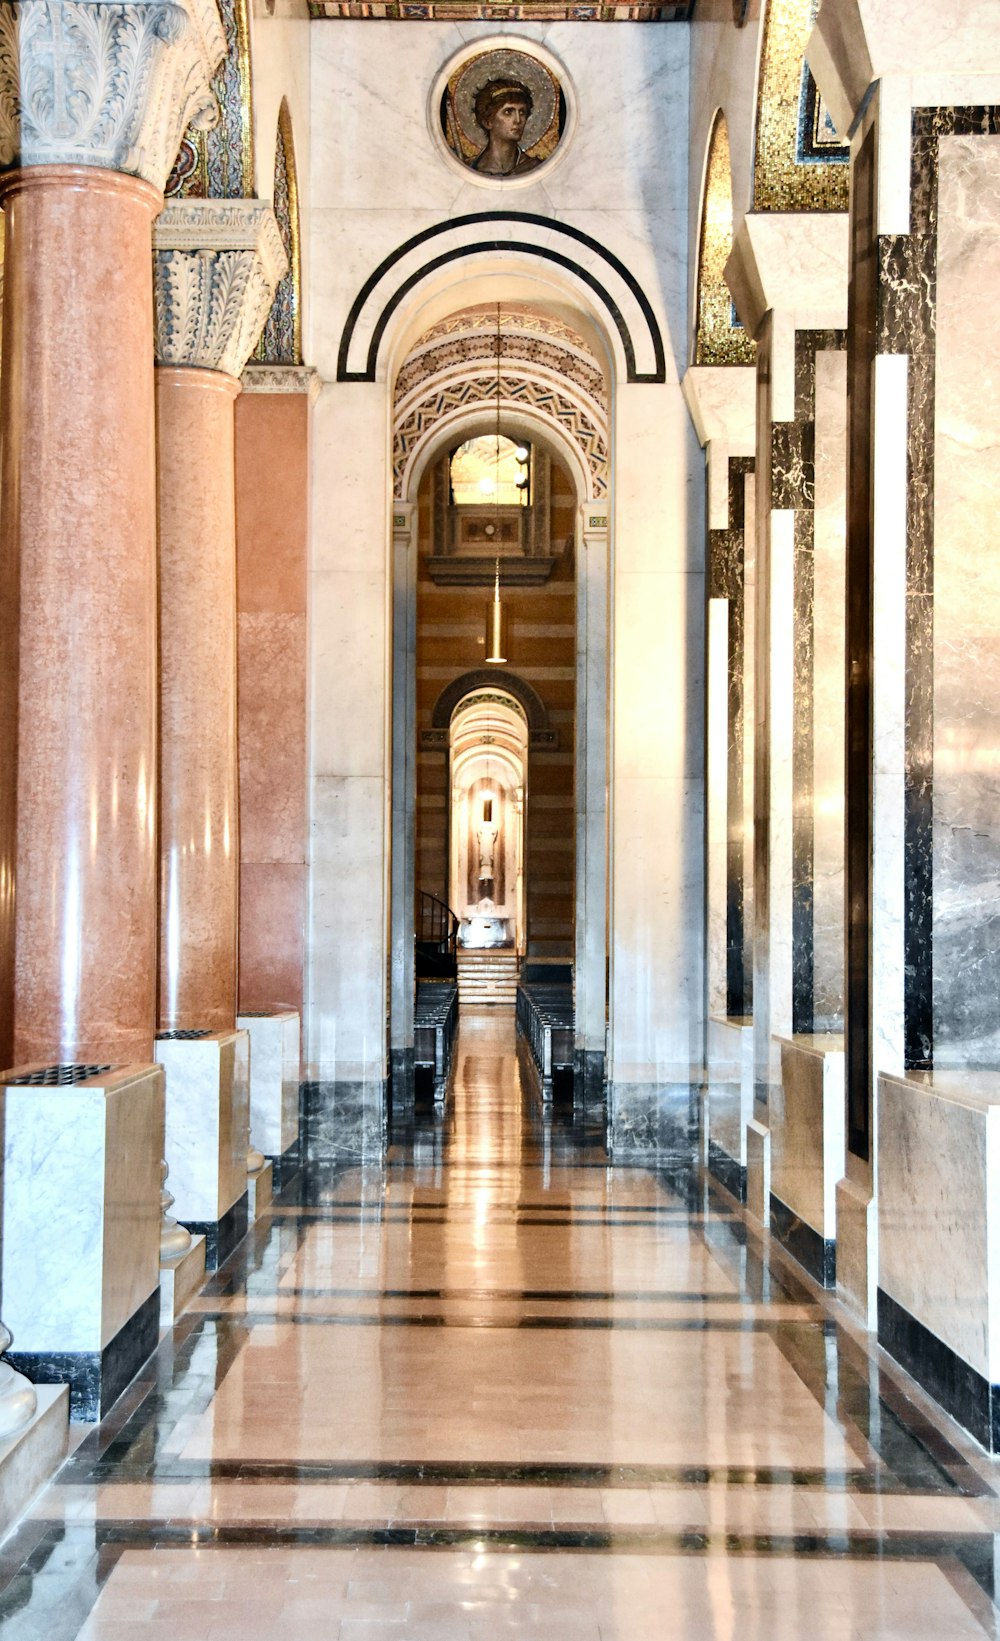 a hallway with marble columns and a clock on the wall